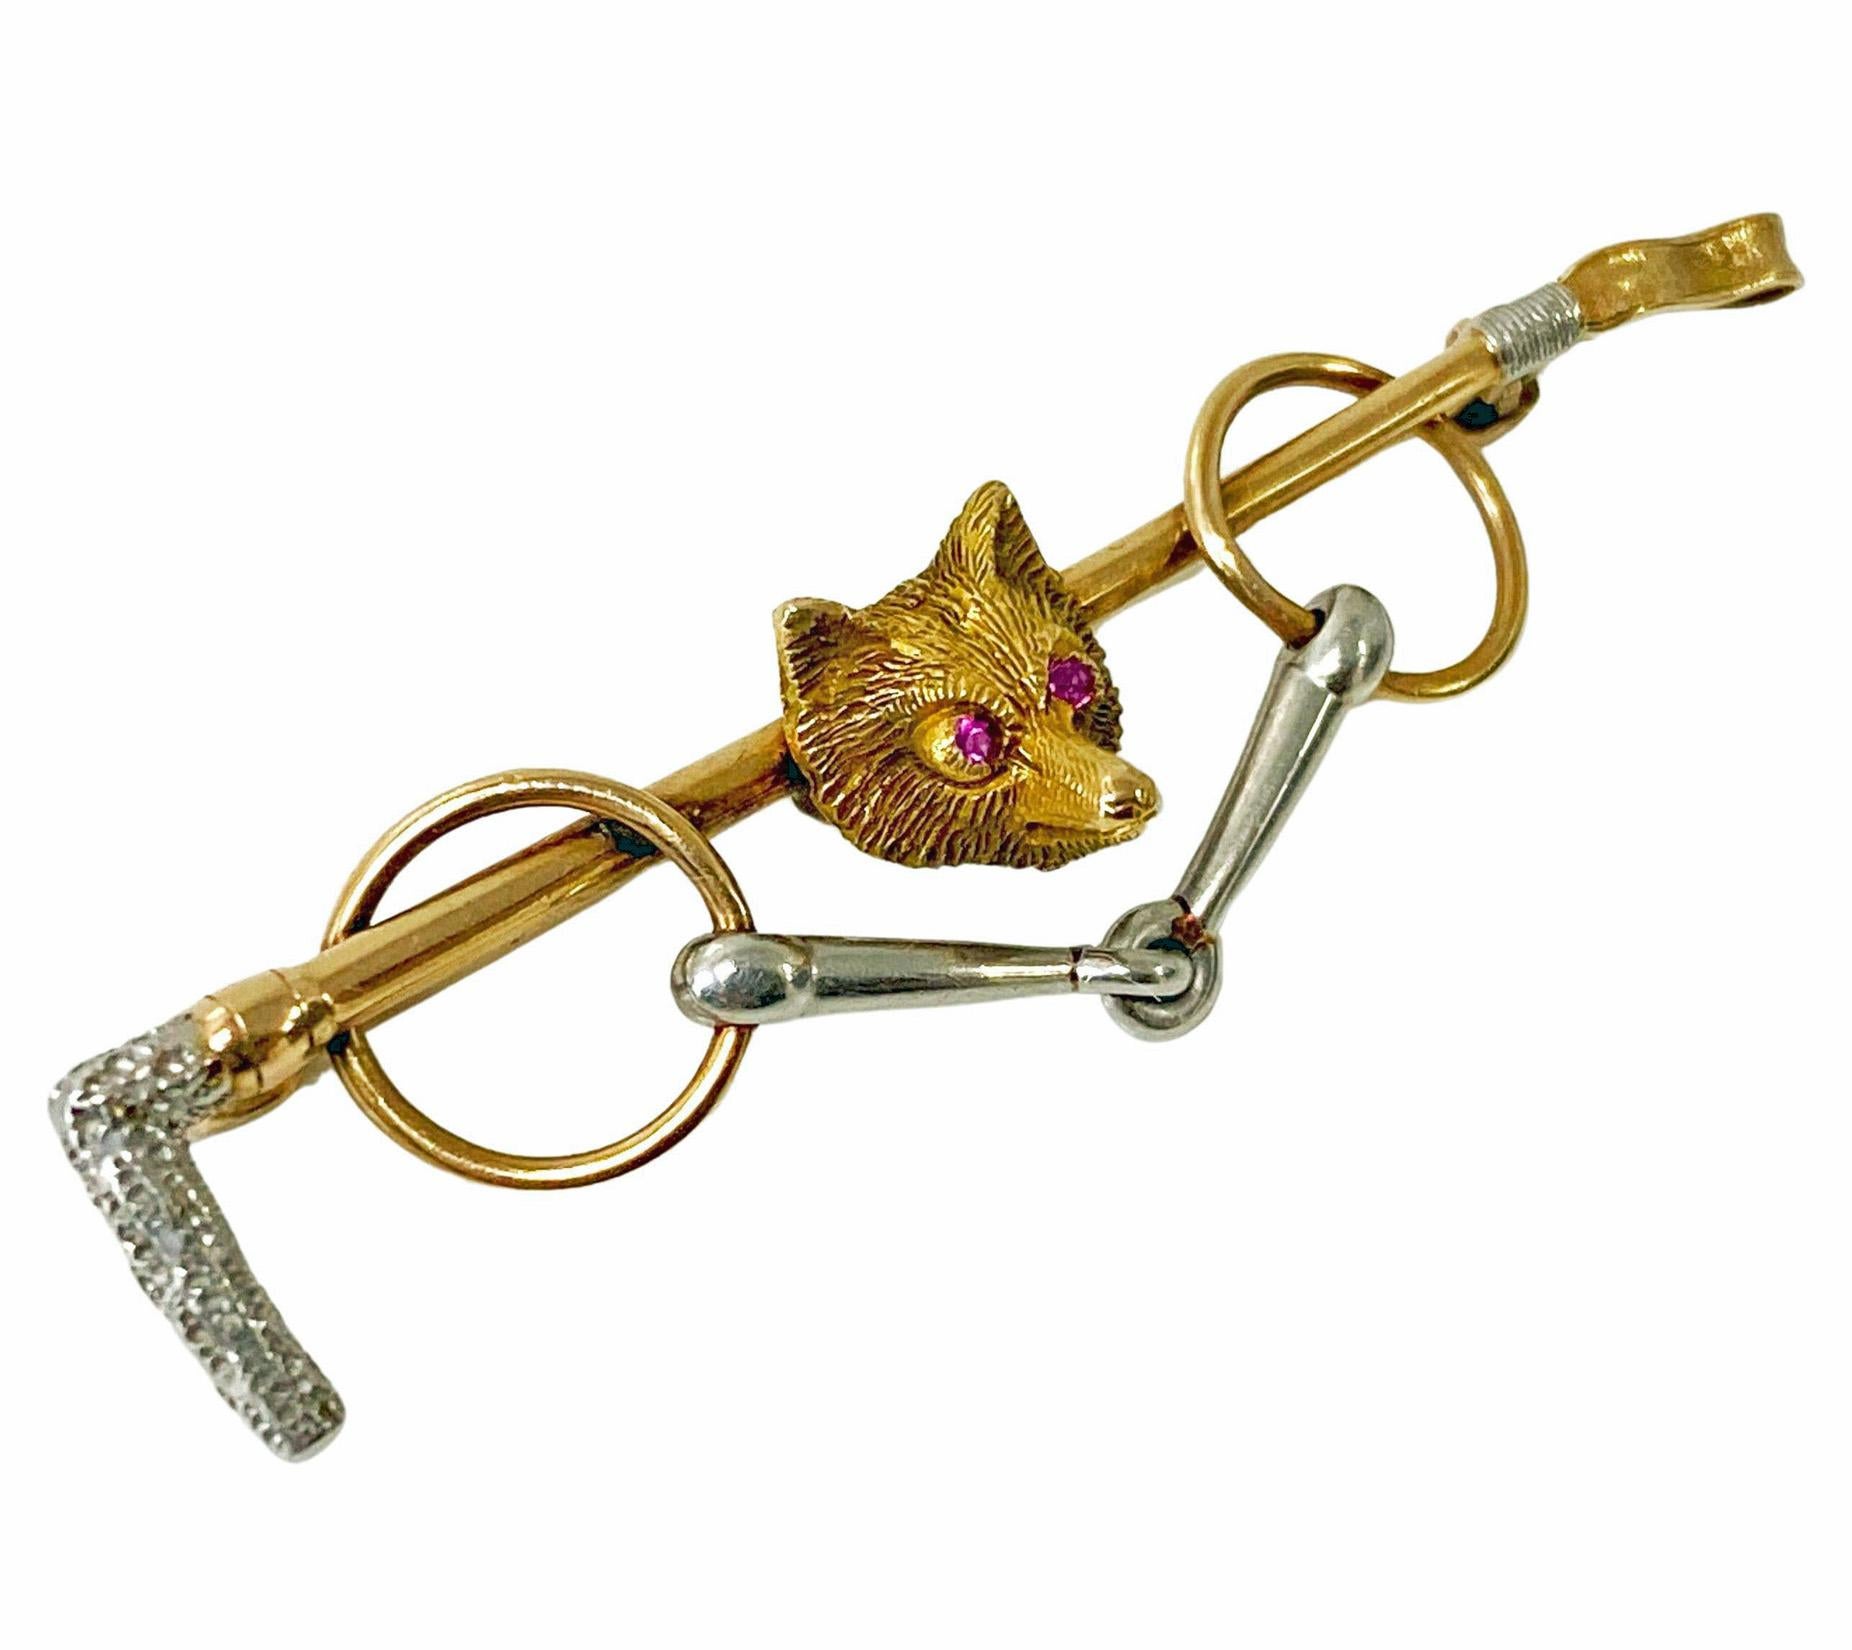 Antique Gold Platinum Ruby Fox Brooch complete with stirrups and riding crop circa 1900. The fox head surmounted on a platinum and gold riding crop with stirrups attached, eyes set with small round facetted natural Medium Strong Red Rubies,